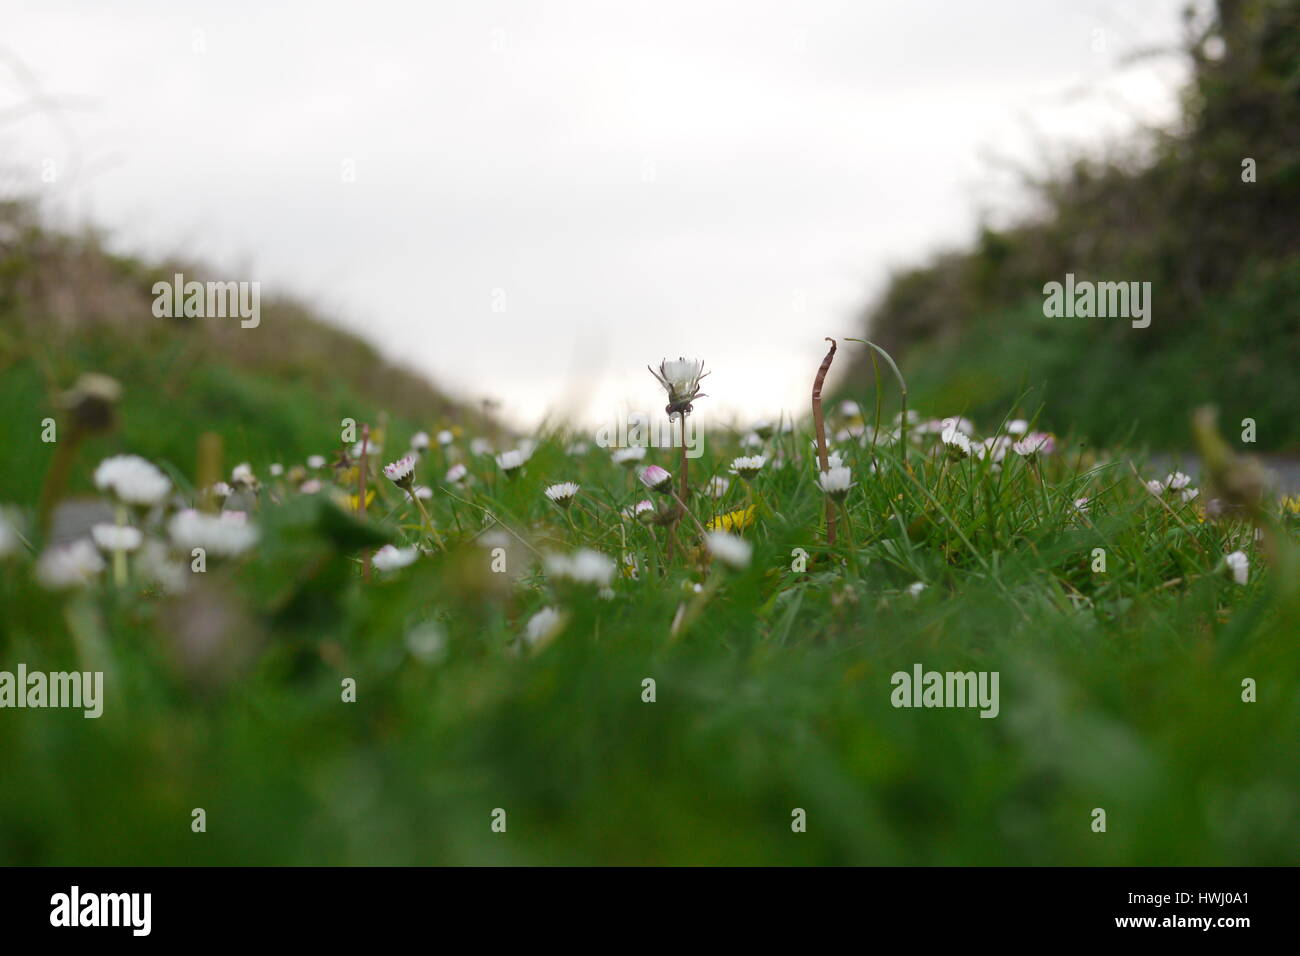 The grassy road.A grass road/track in Ireland with a daisy in focus. Stock Photo